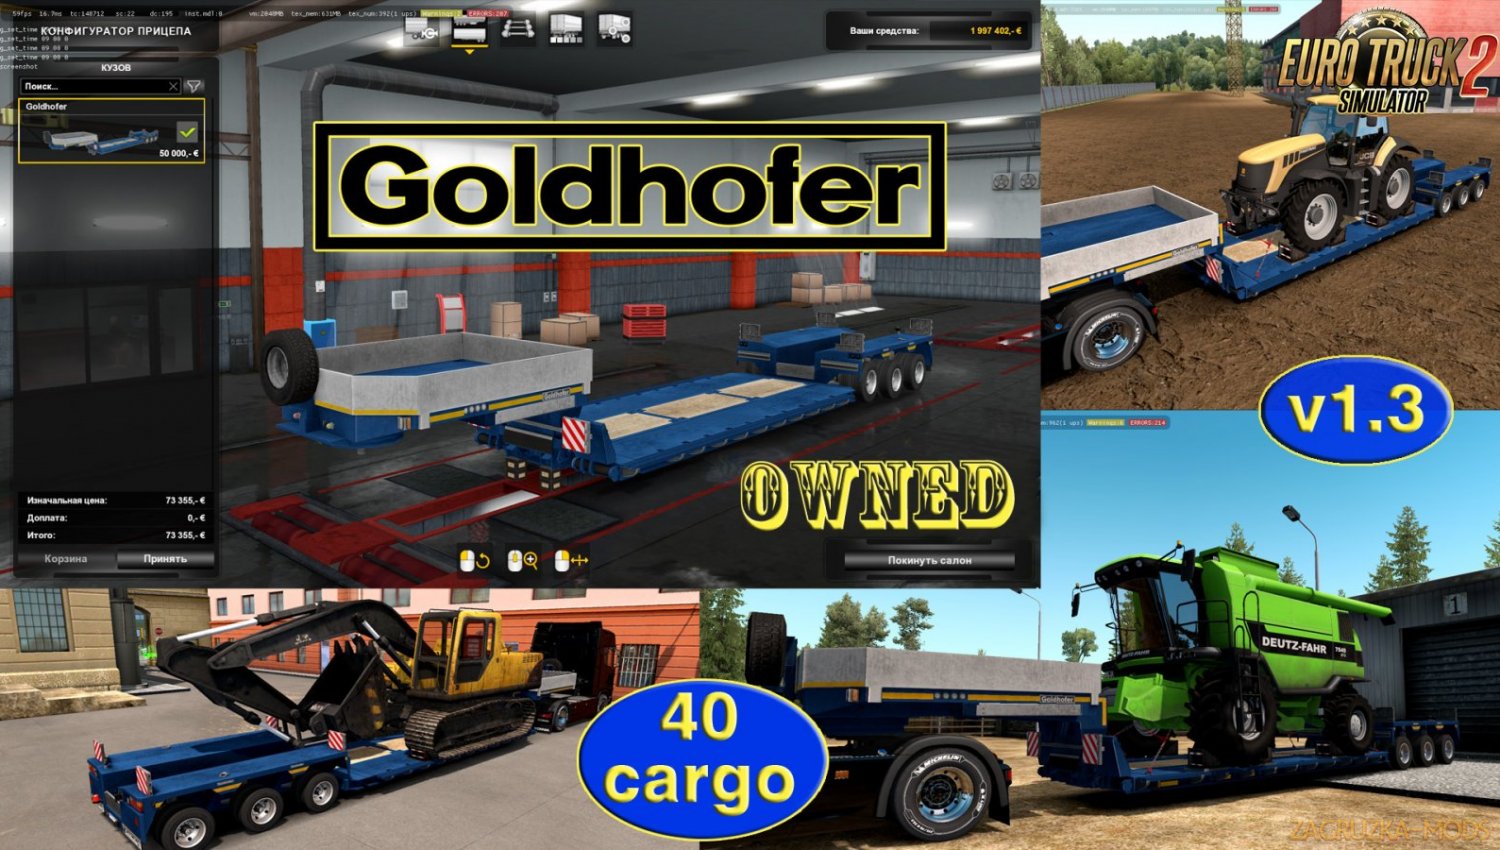 Ownable trailer Goldhofer v1.3 by Jazzycat